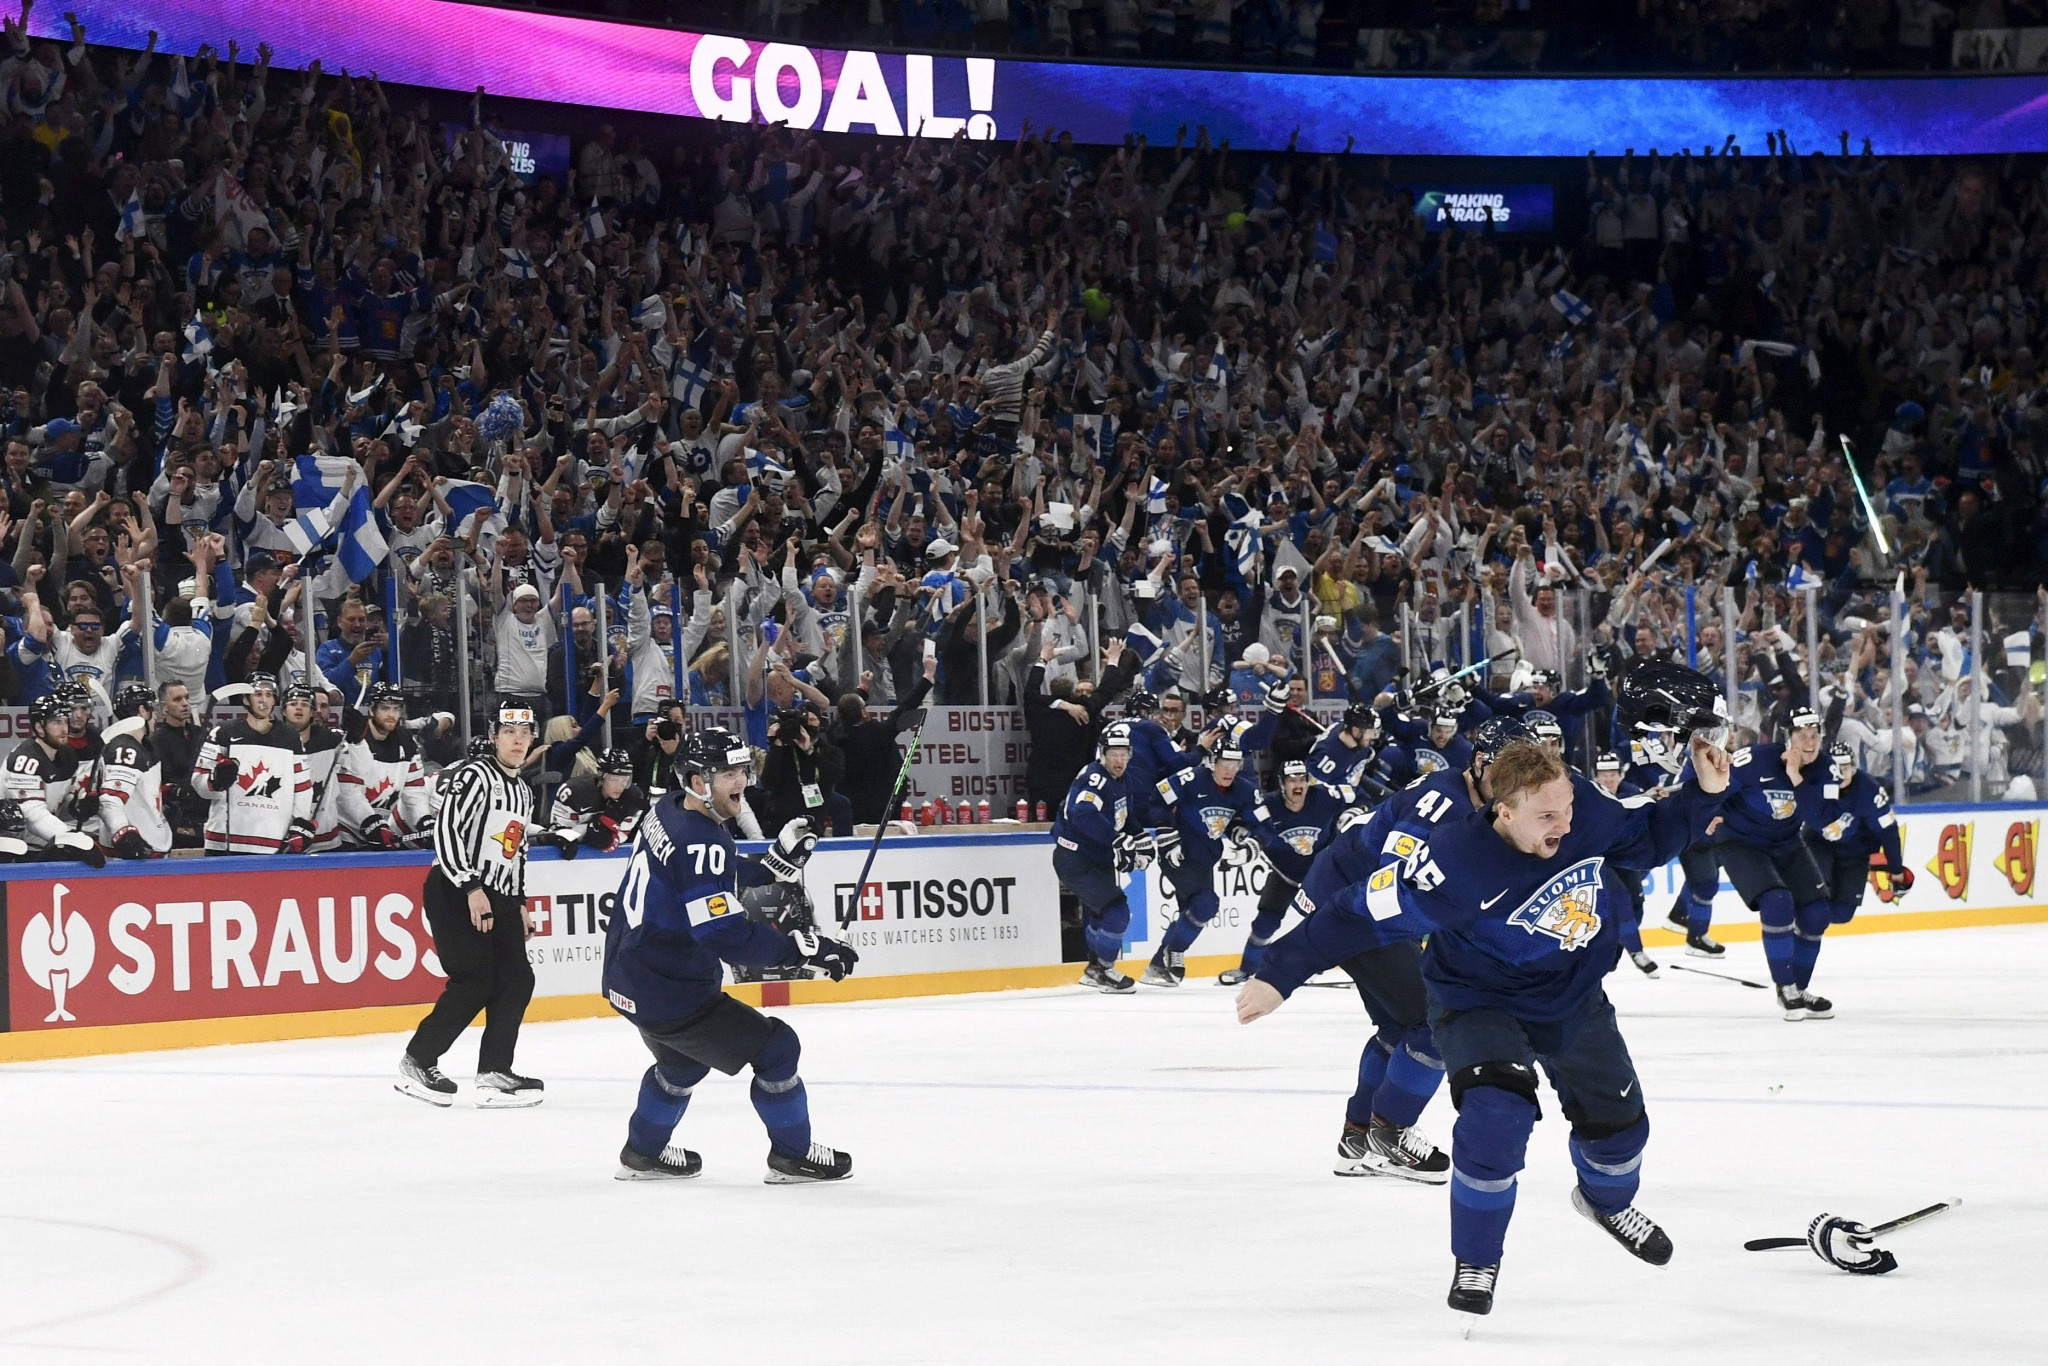 Finland won their fourth Men's Ice Hockey World Championship with an overtime goal ©Getty Images